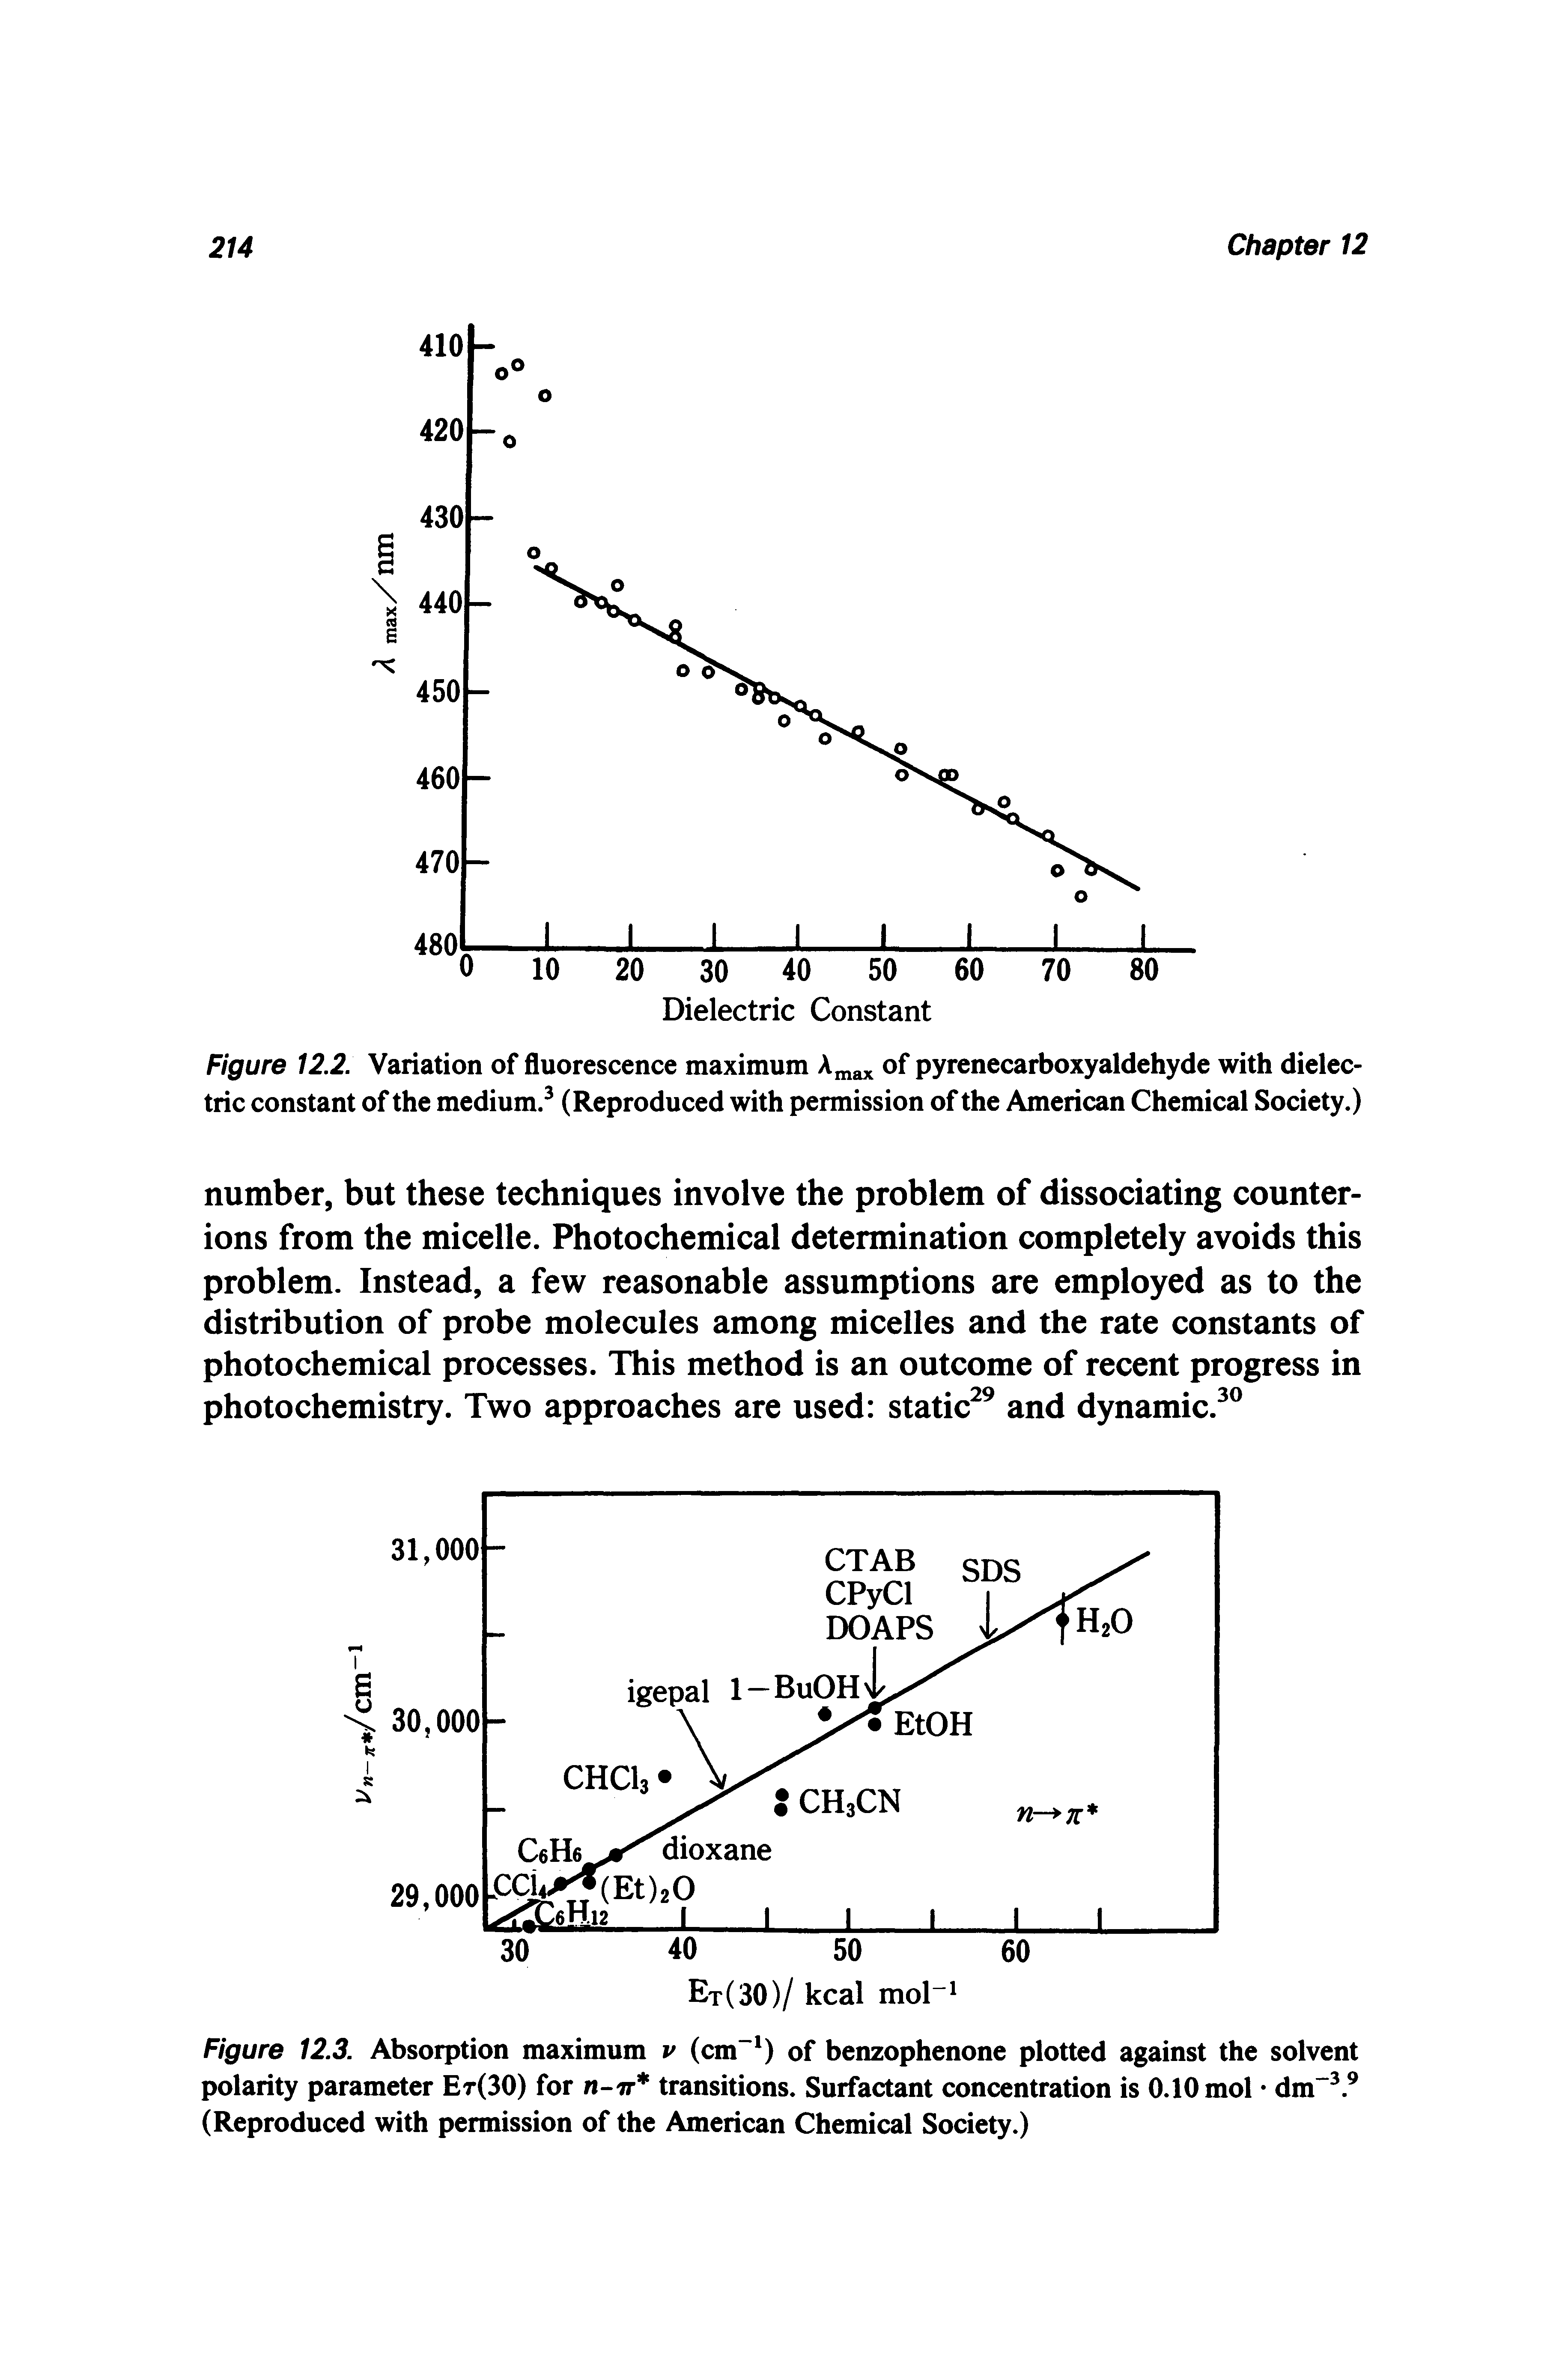 Figure 12.3. Absorption maximum v (cm ) of benzophenone plotted against the solvent polarity parameter Et(30) for w-tt transitions. Surfactant concentration is 0.10 mol dm. (Reproduced with permission of the American Chemical Society.)...